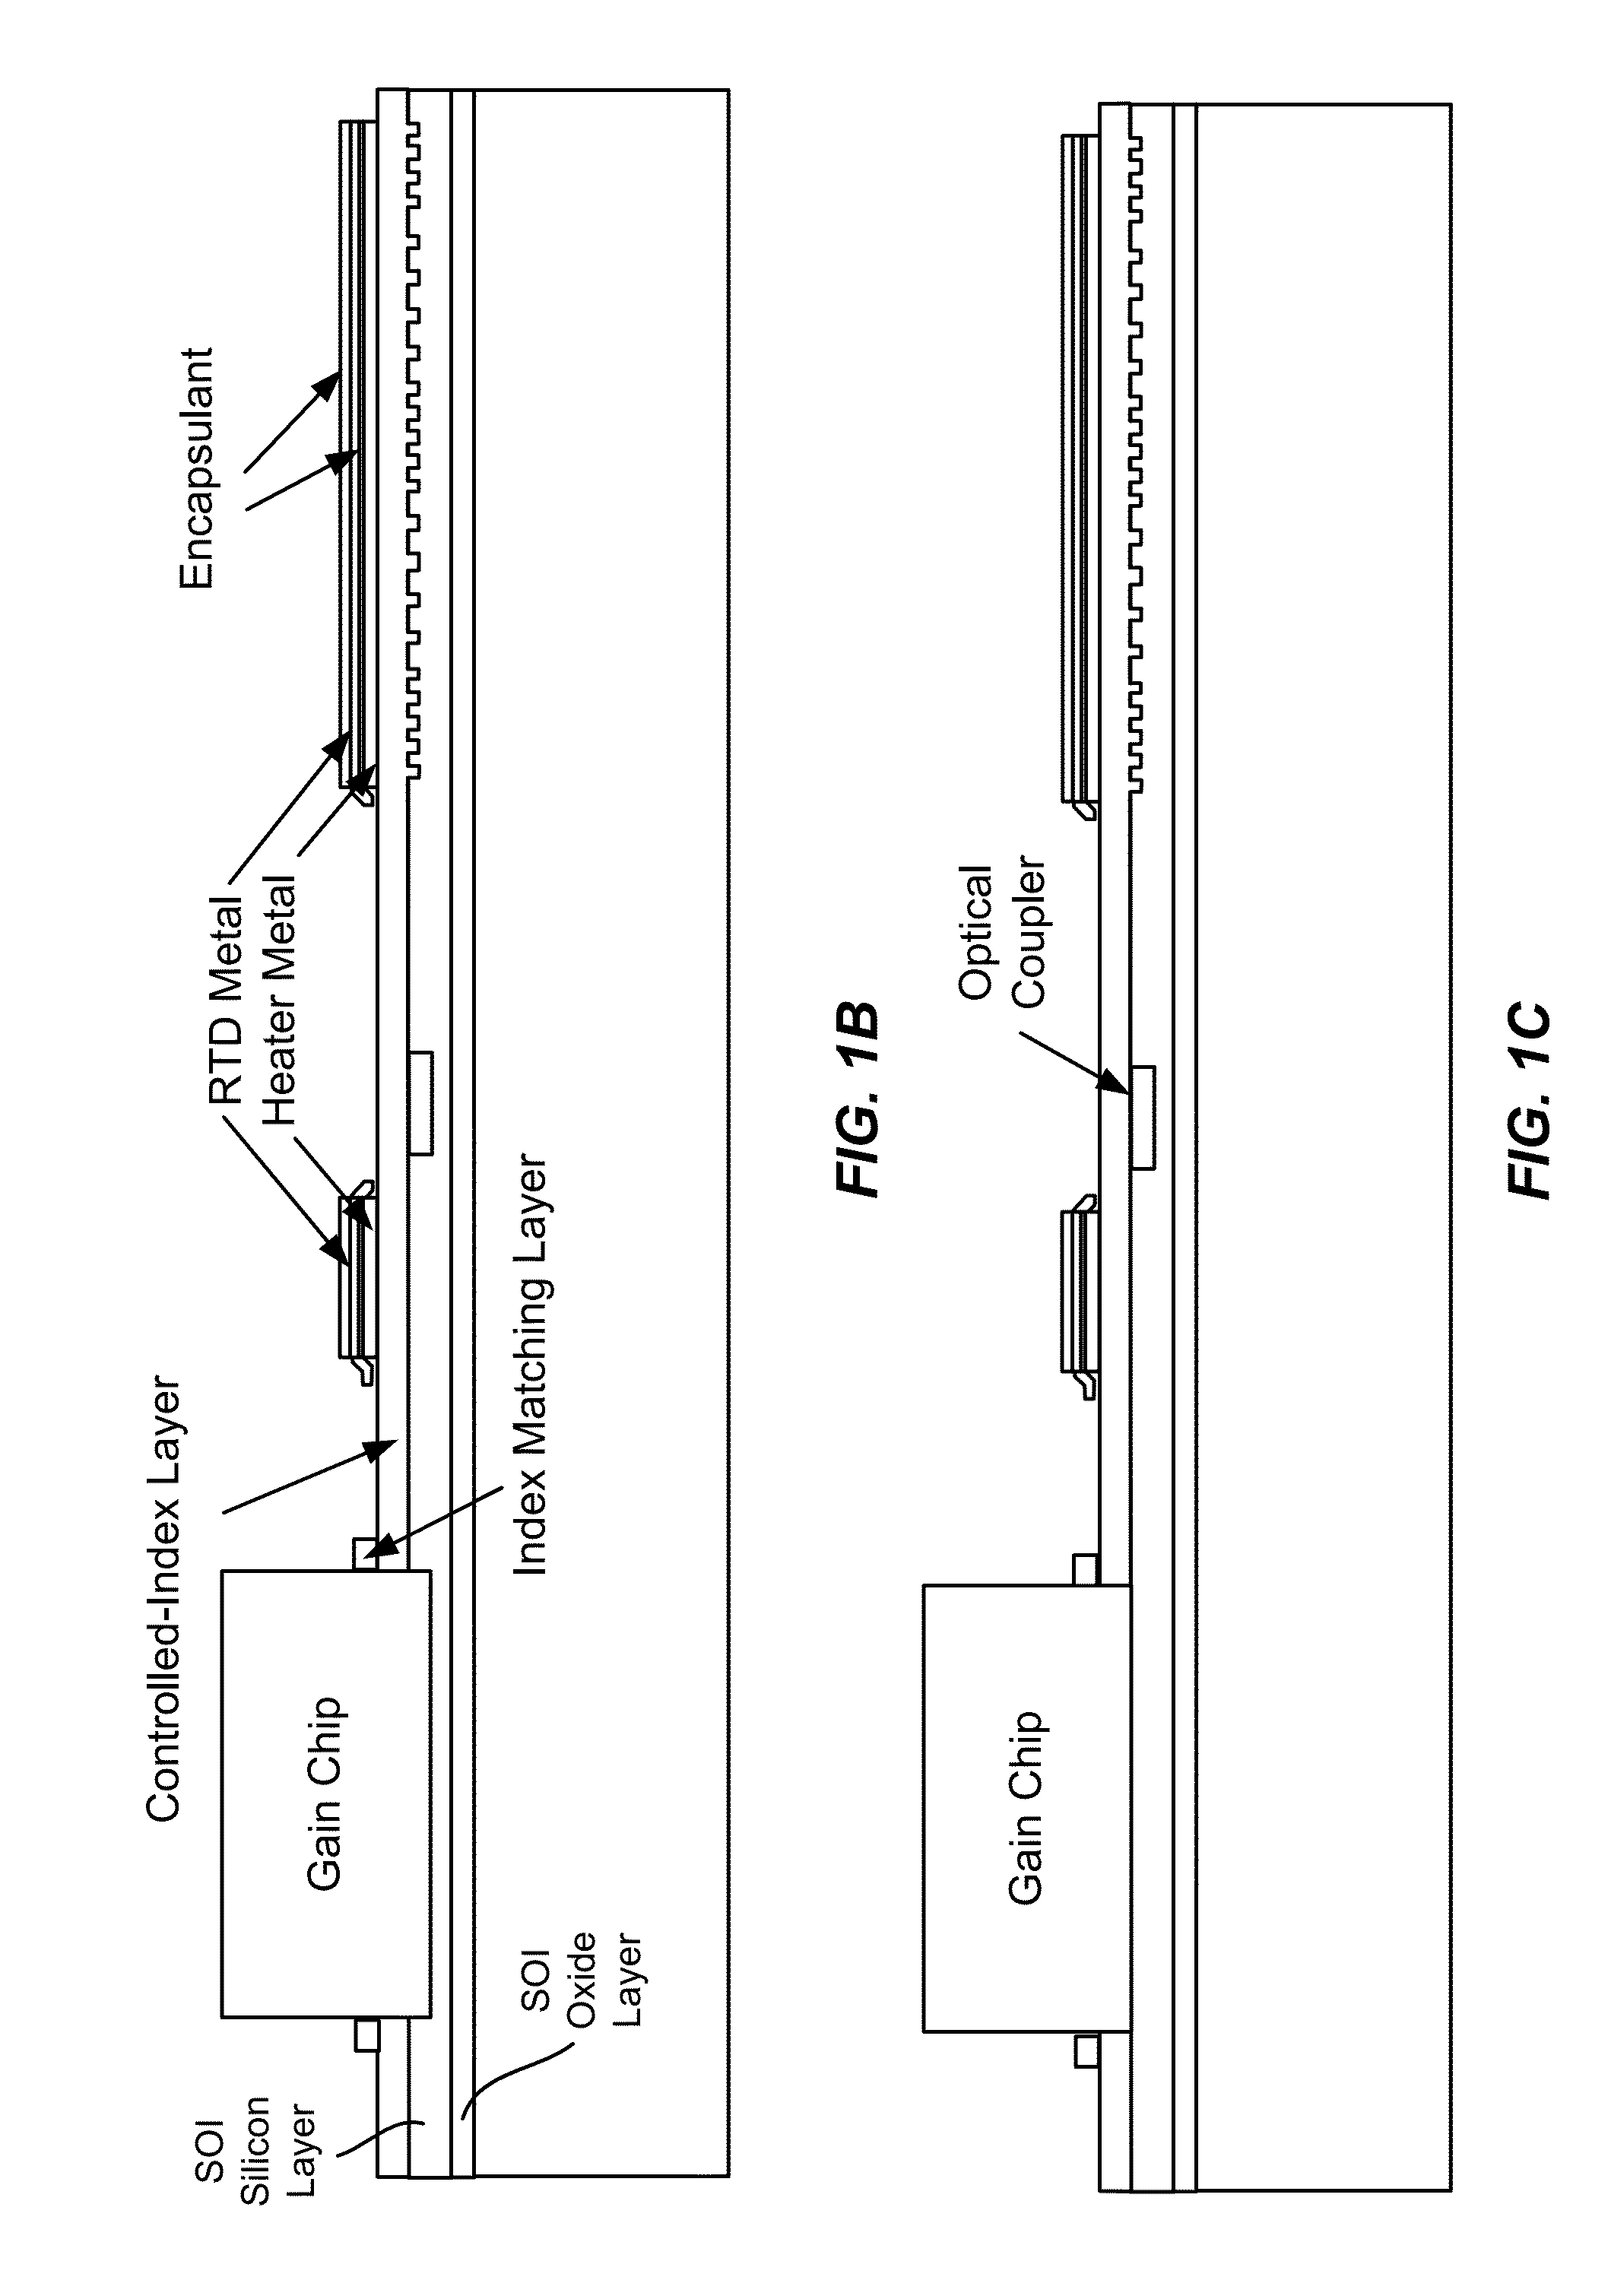 Tunable hybrid laser with carrier-induced phase control